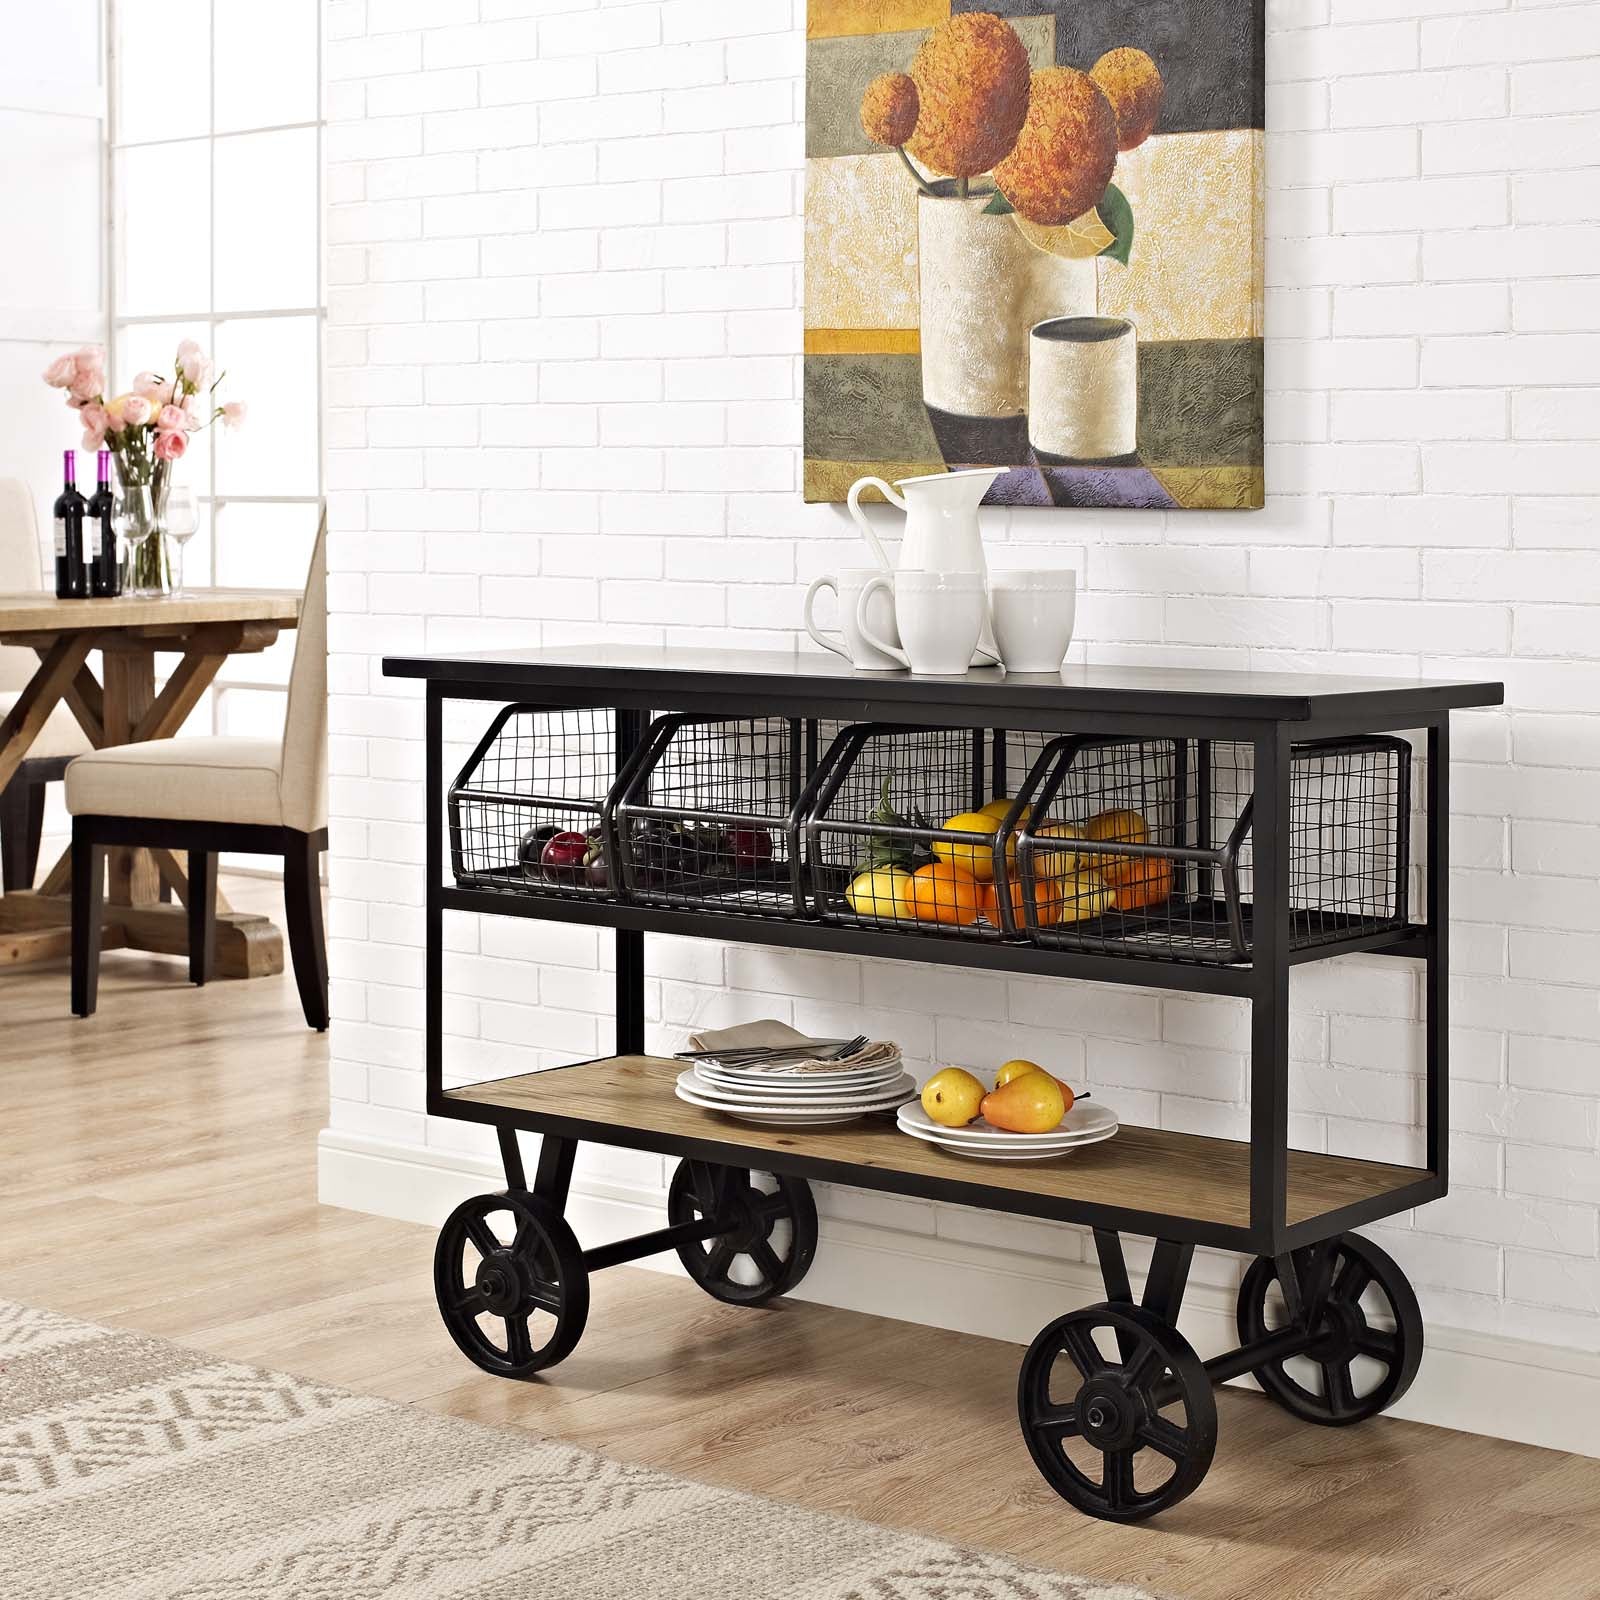 Fairground Serving Stand - East Shore Modern Home Furnishings